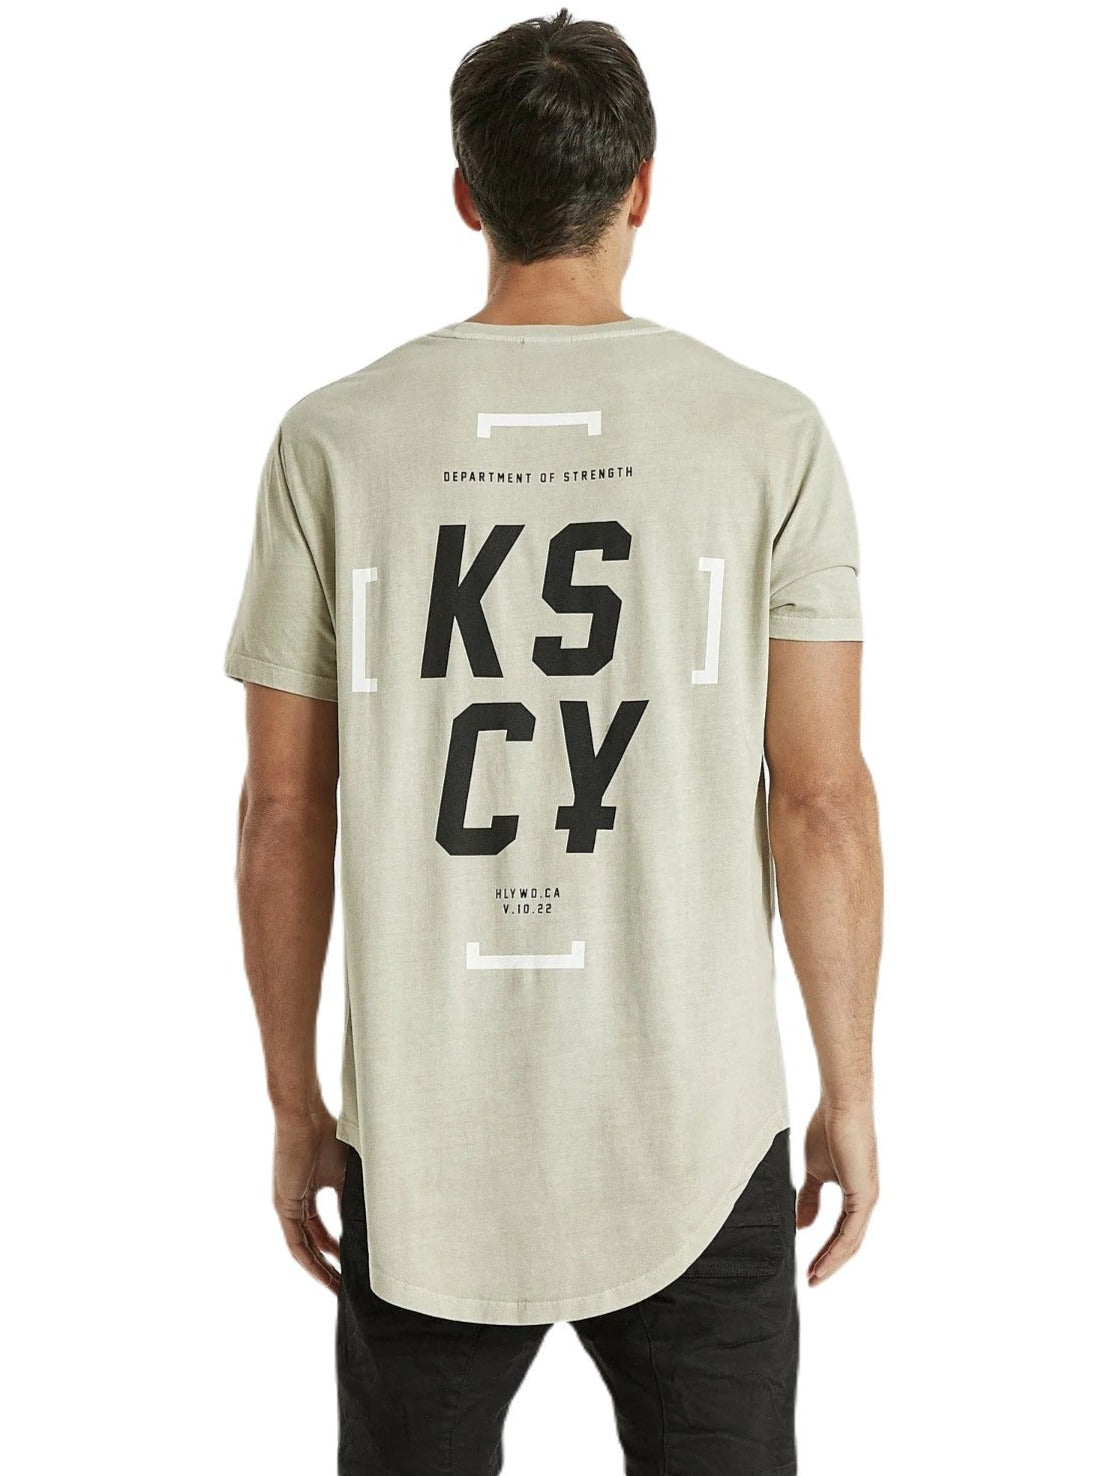 Kiss Chacey - KSCY Downtown Dual Curved Tee - Pigment